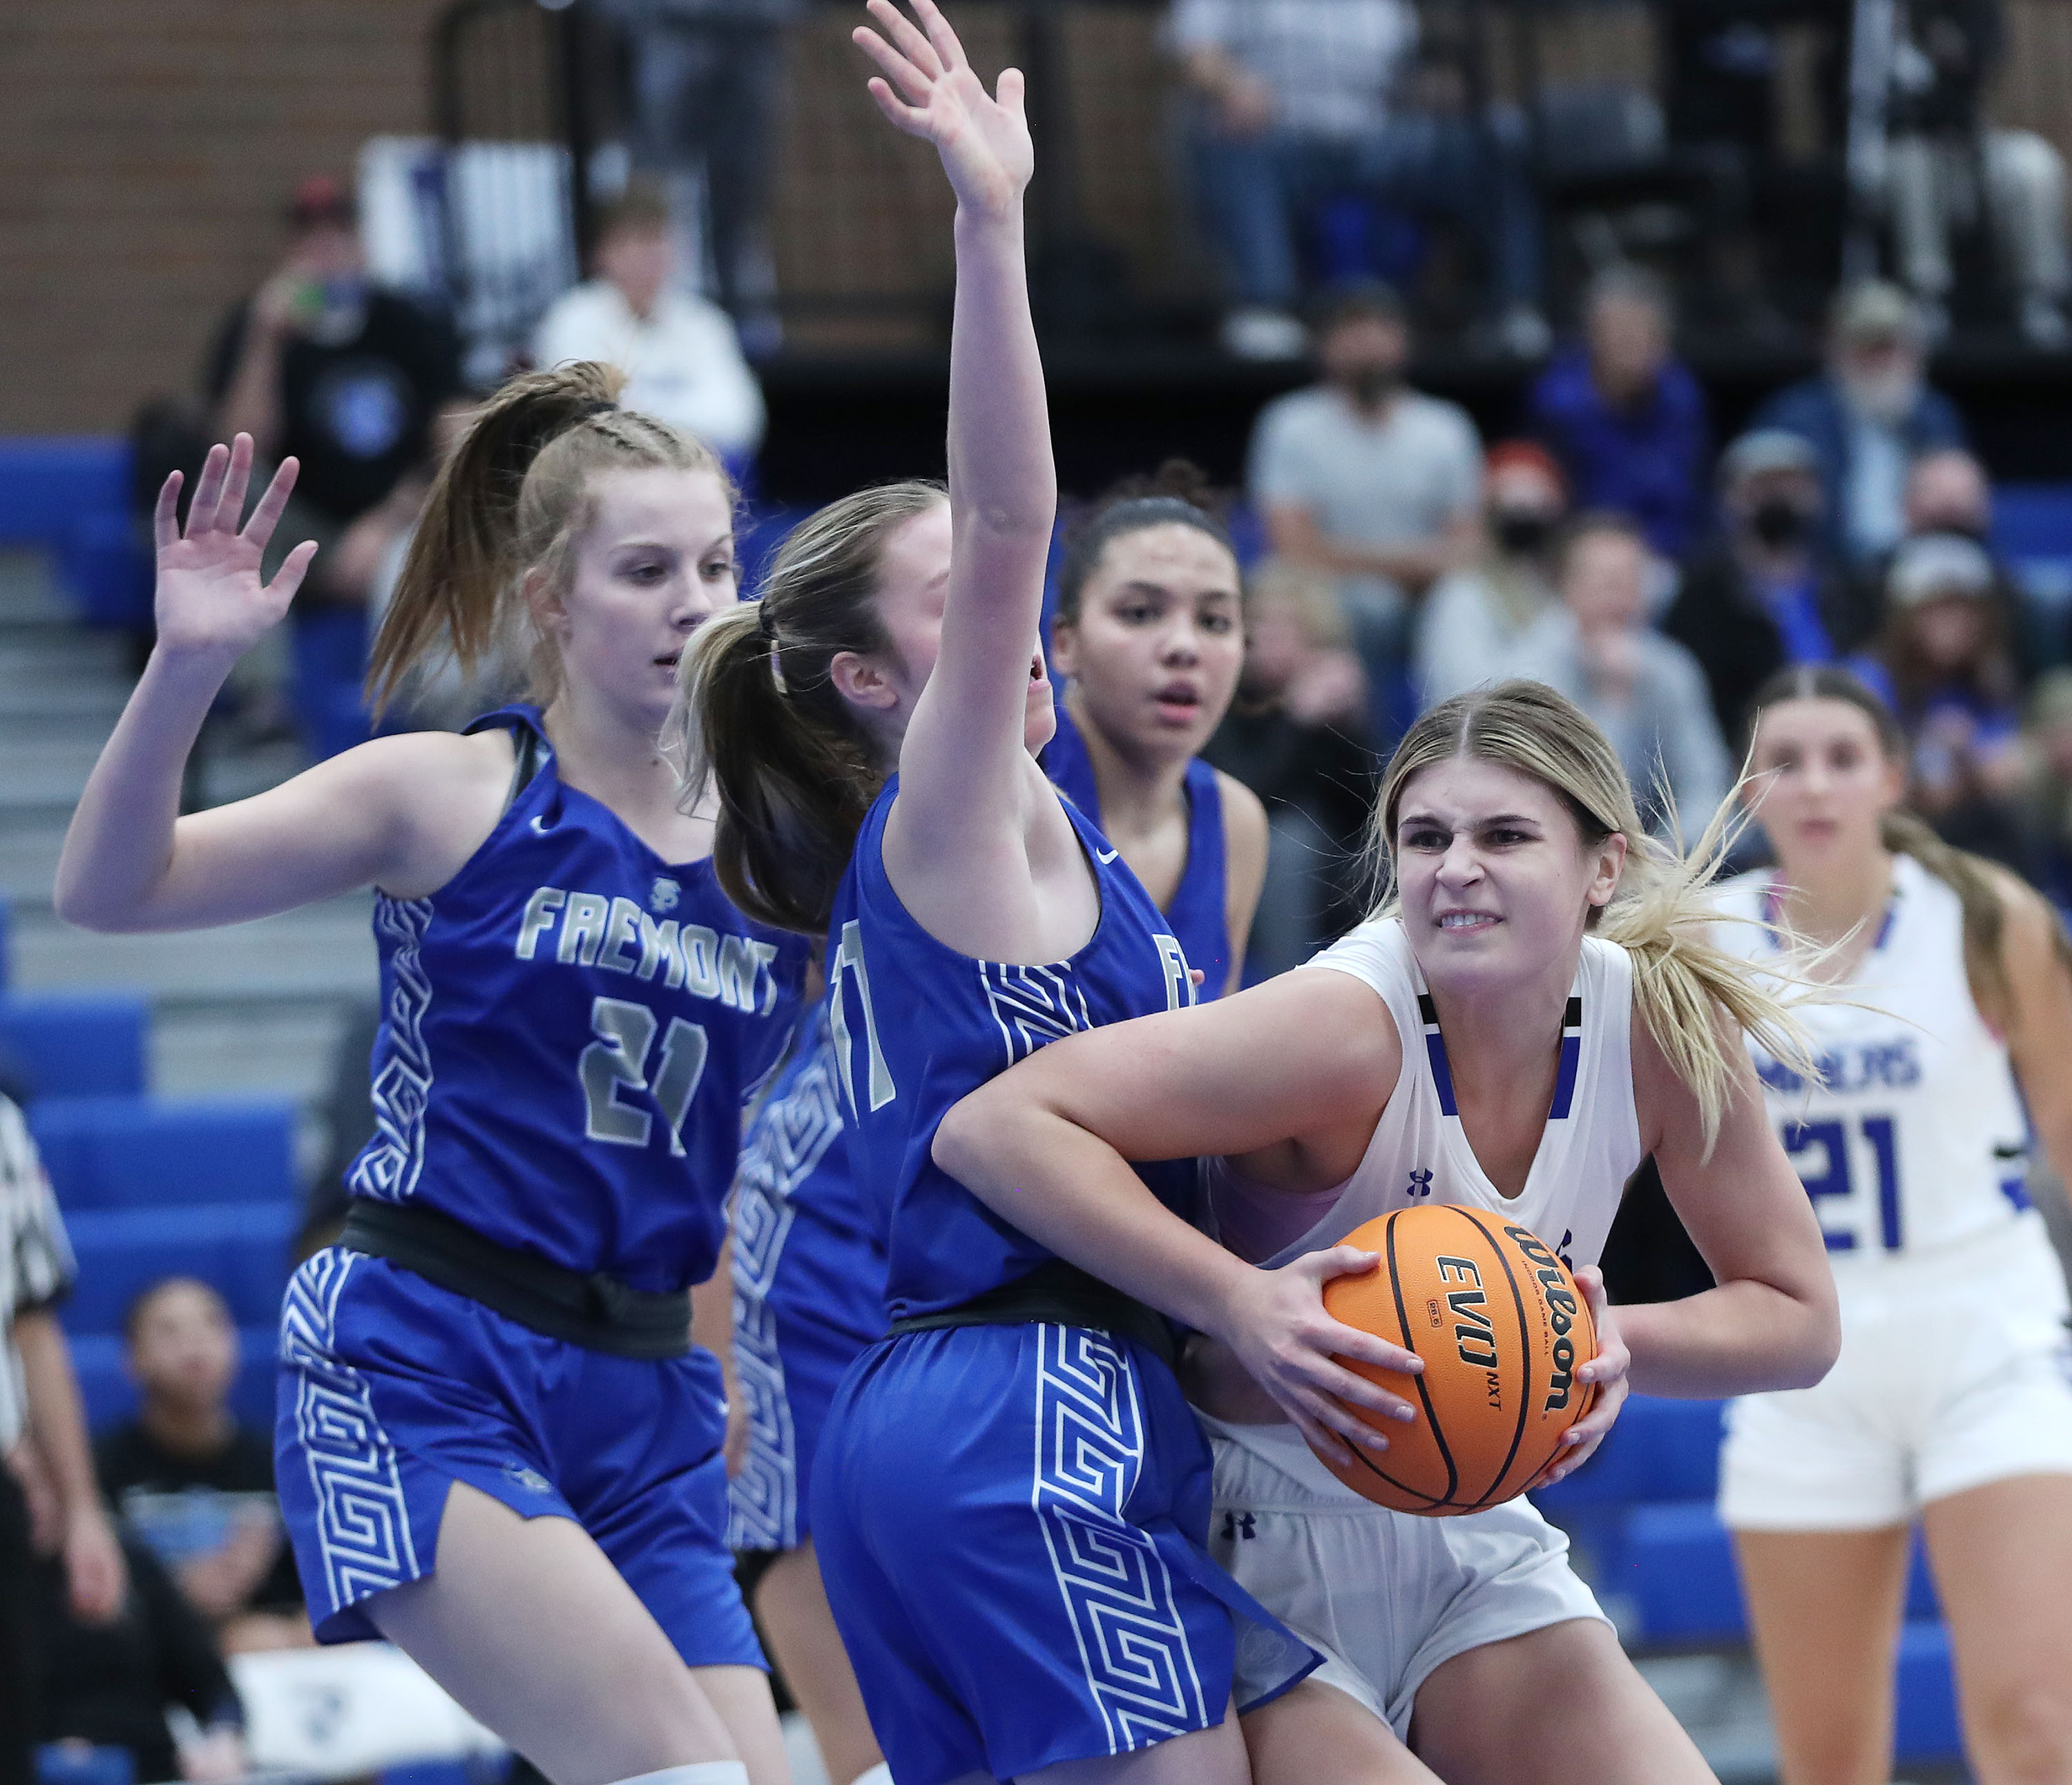 Fremont and Bingham compete in a high school girls basketball game in South Jordan on Thursday, Dec. 2, 2021.